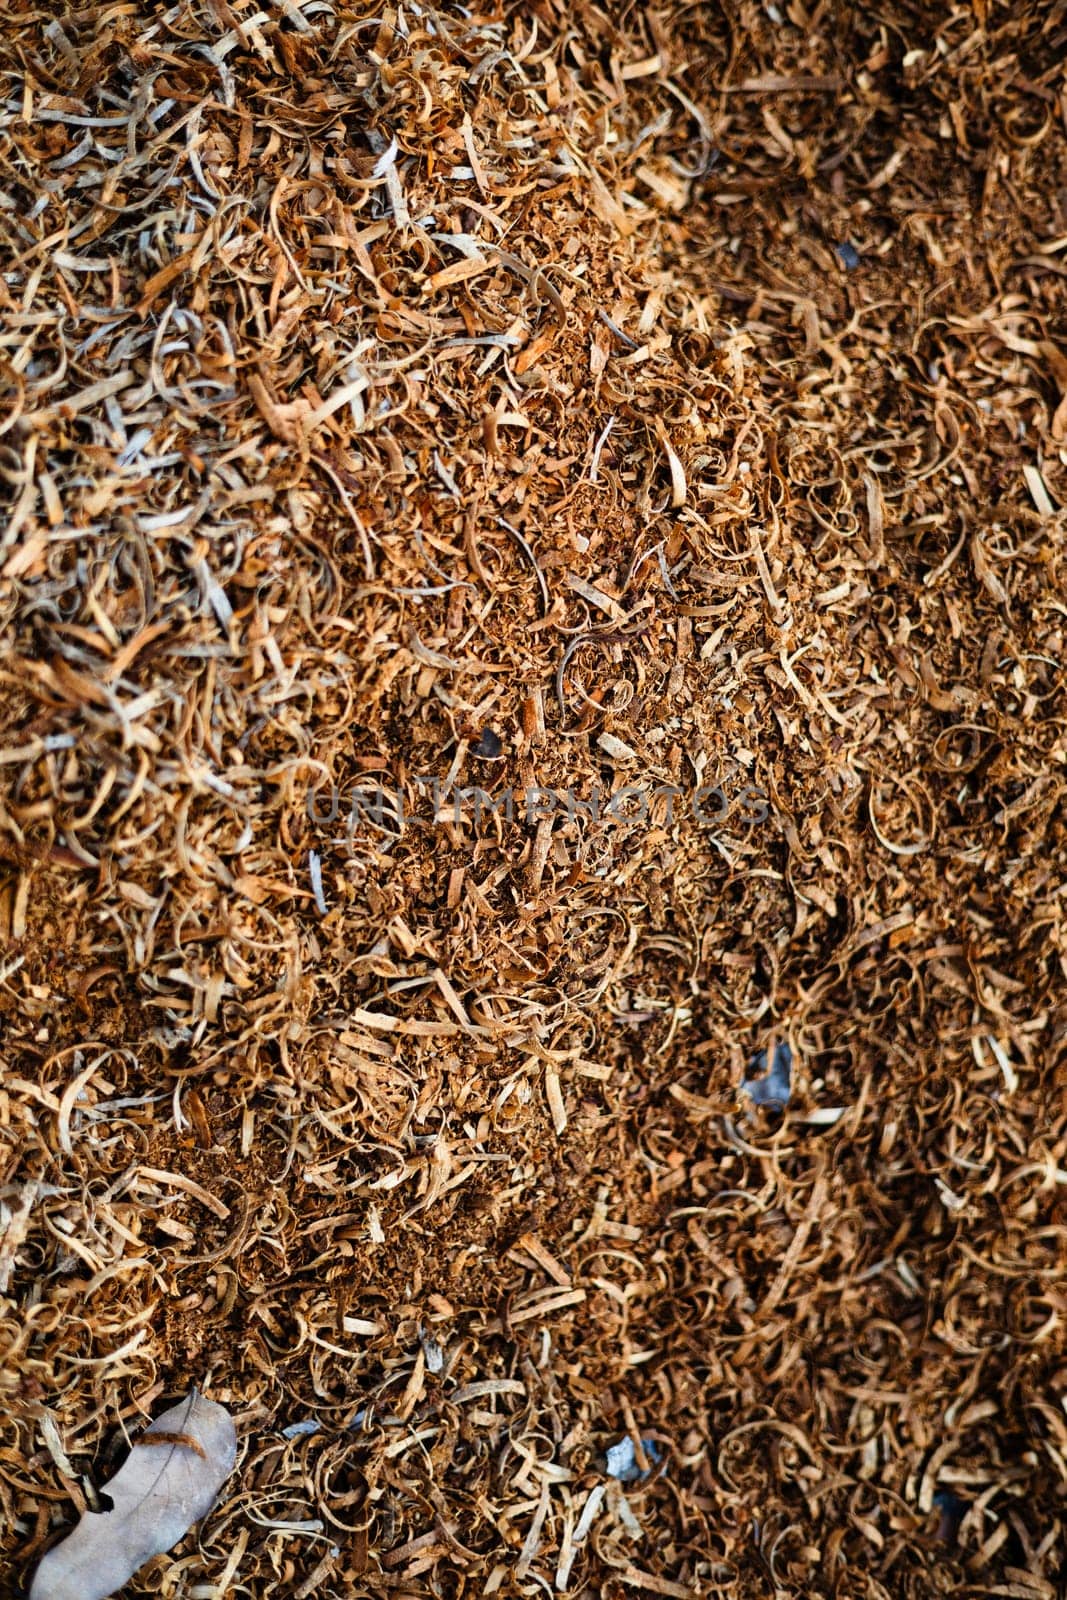 Sawdust And Shavings by urzine